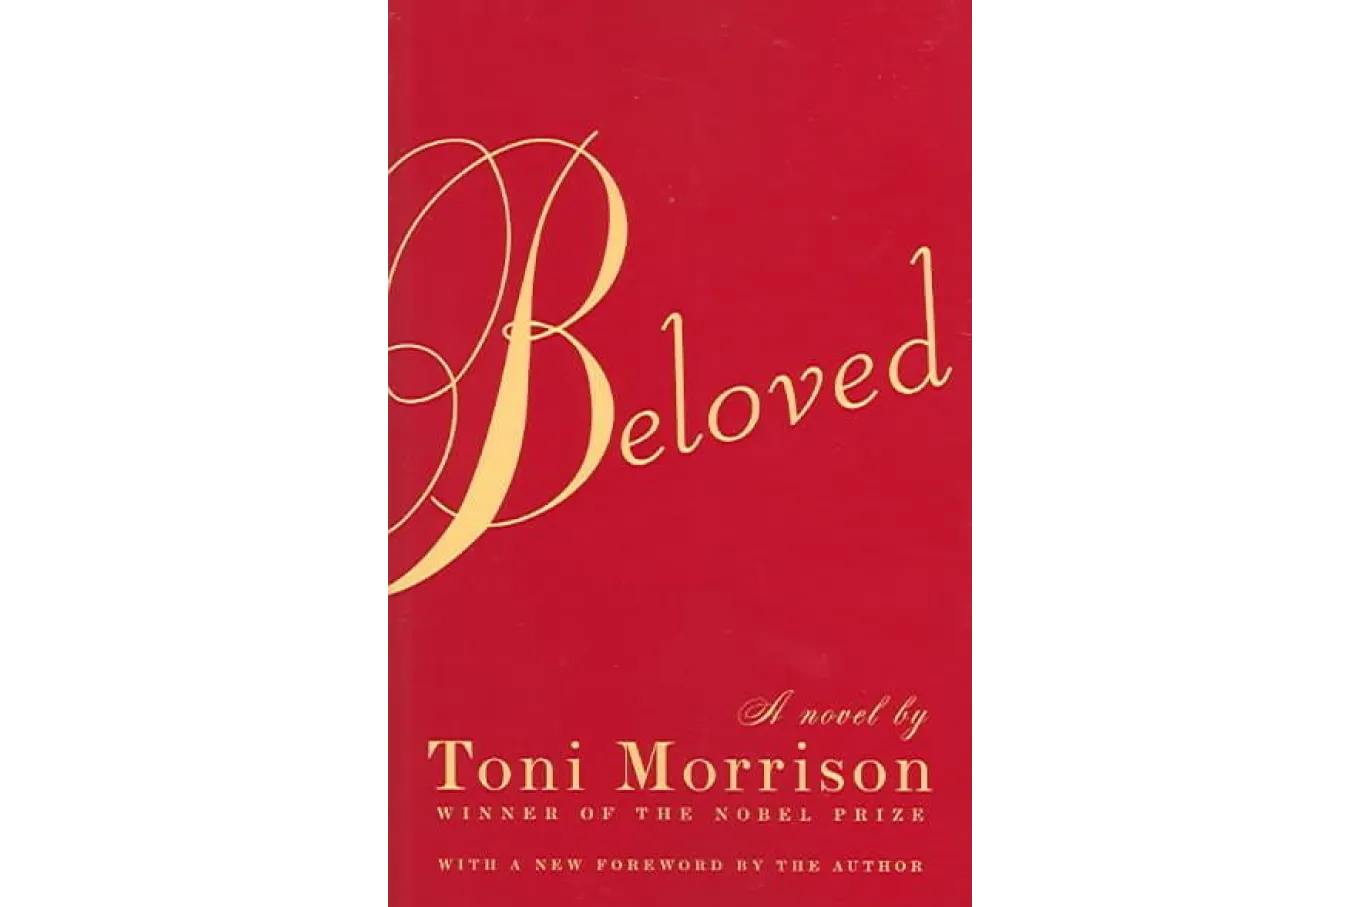 Cover image - the title written in in gold script across a red background